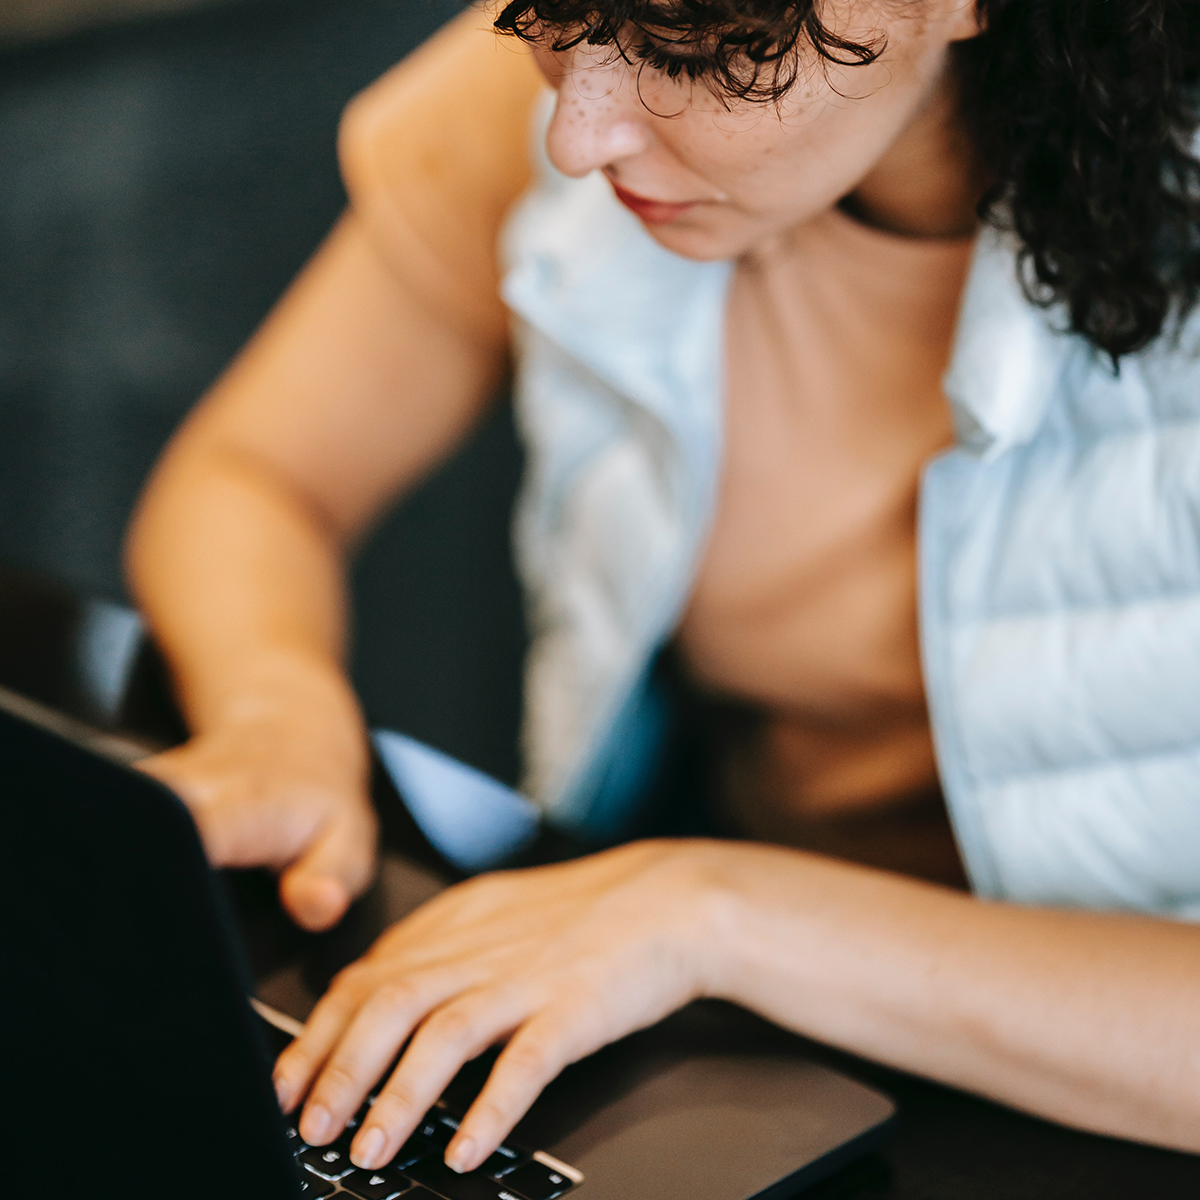 Stock photo of a woman typing on a laptop computer.